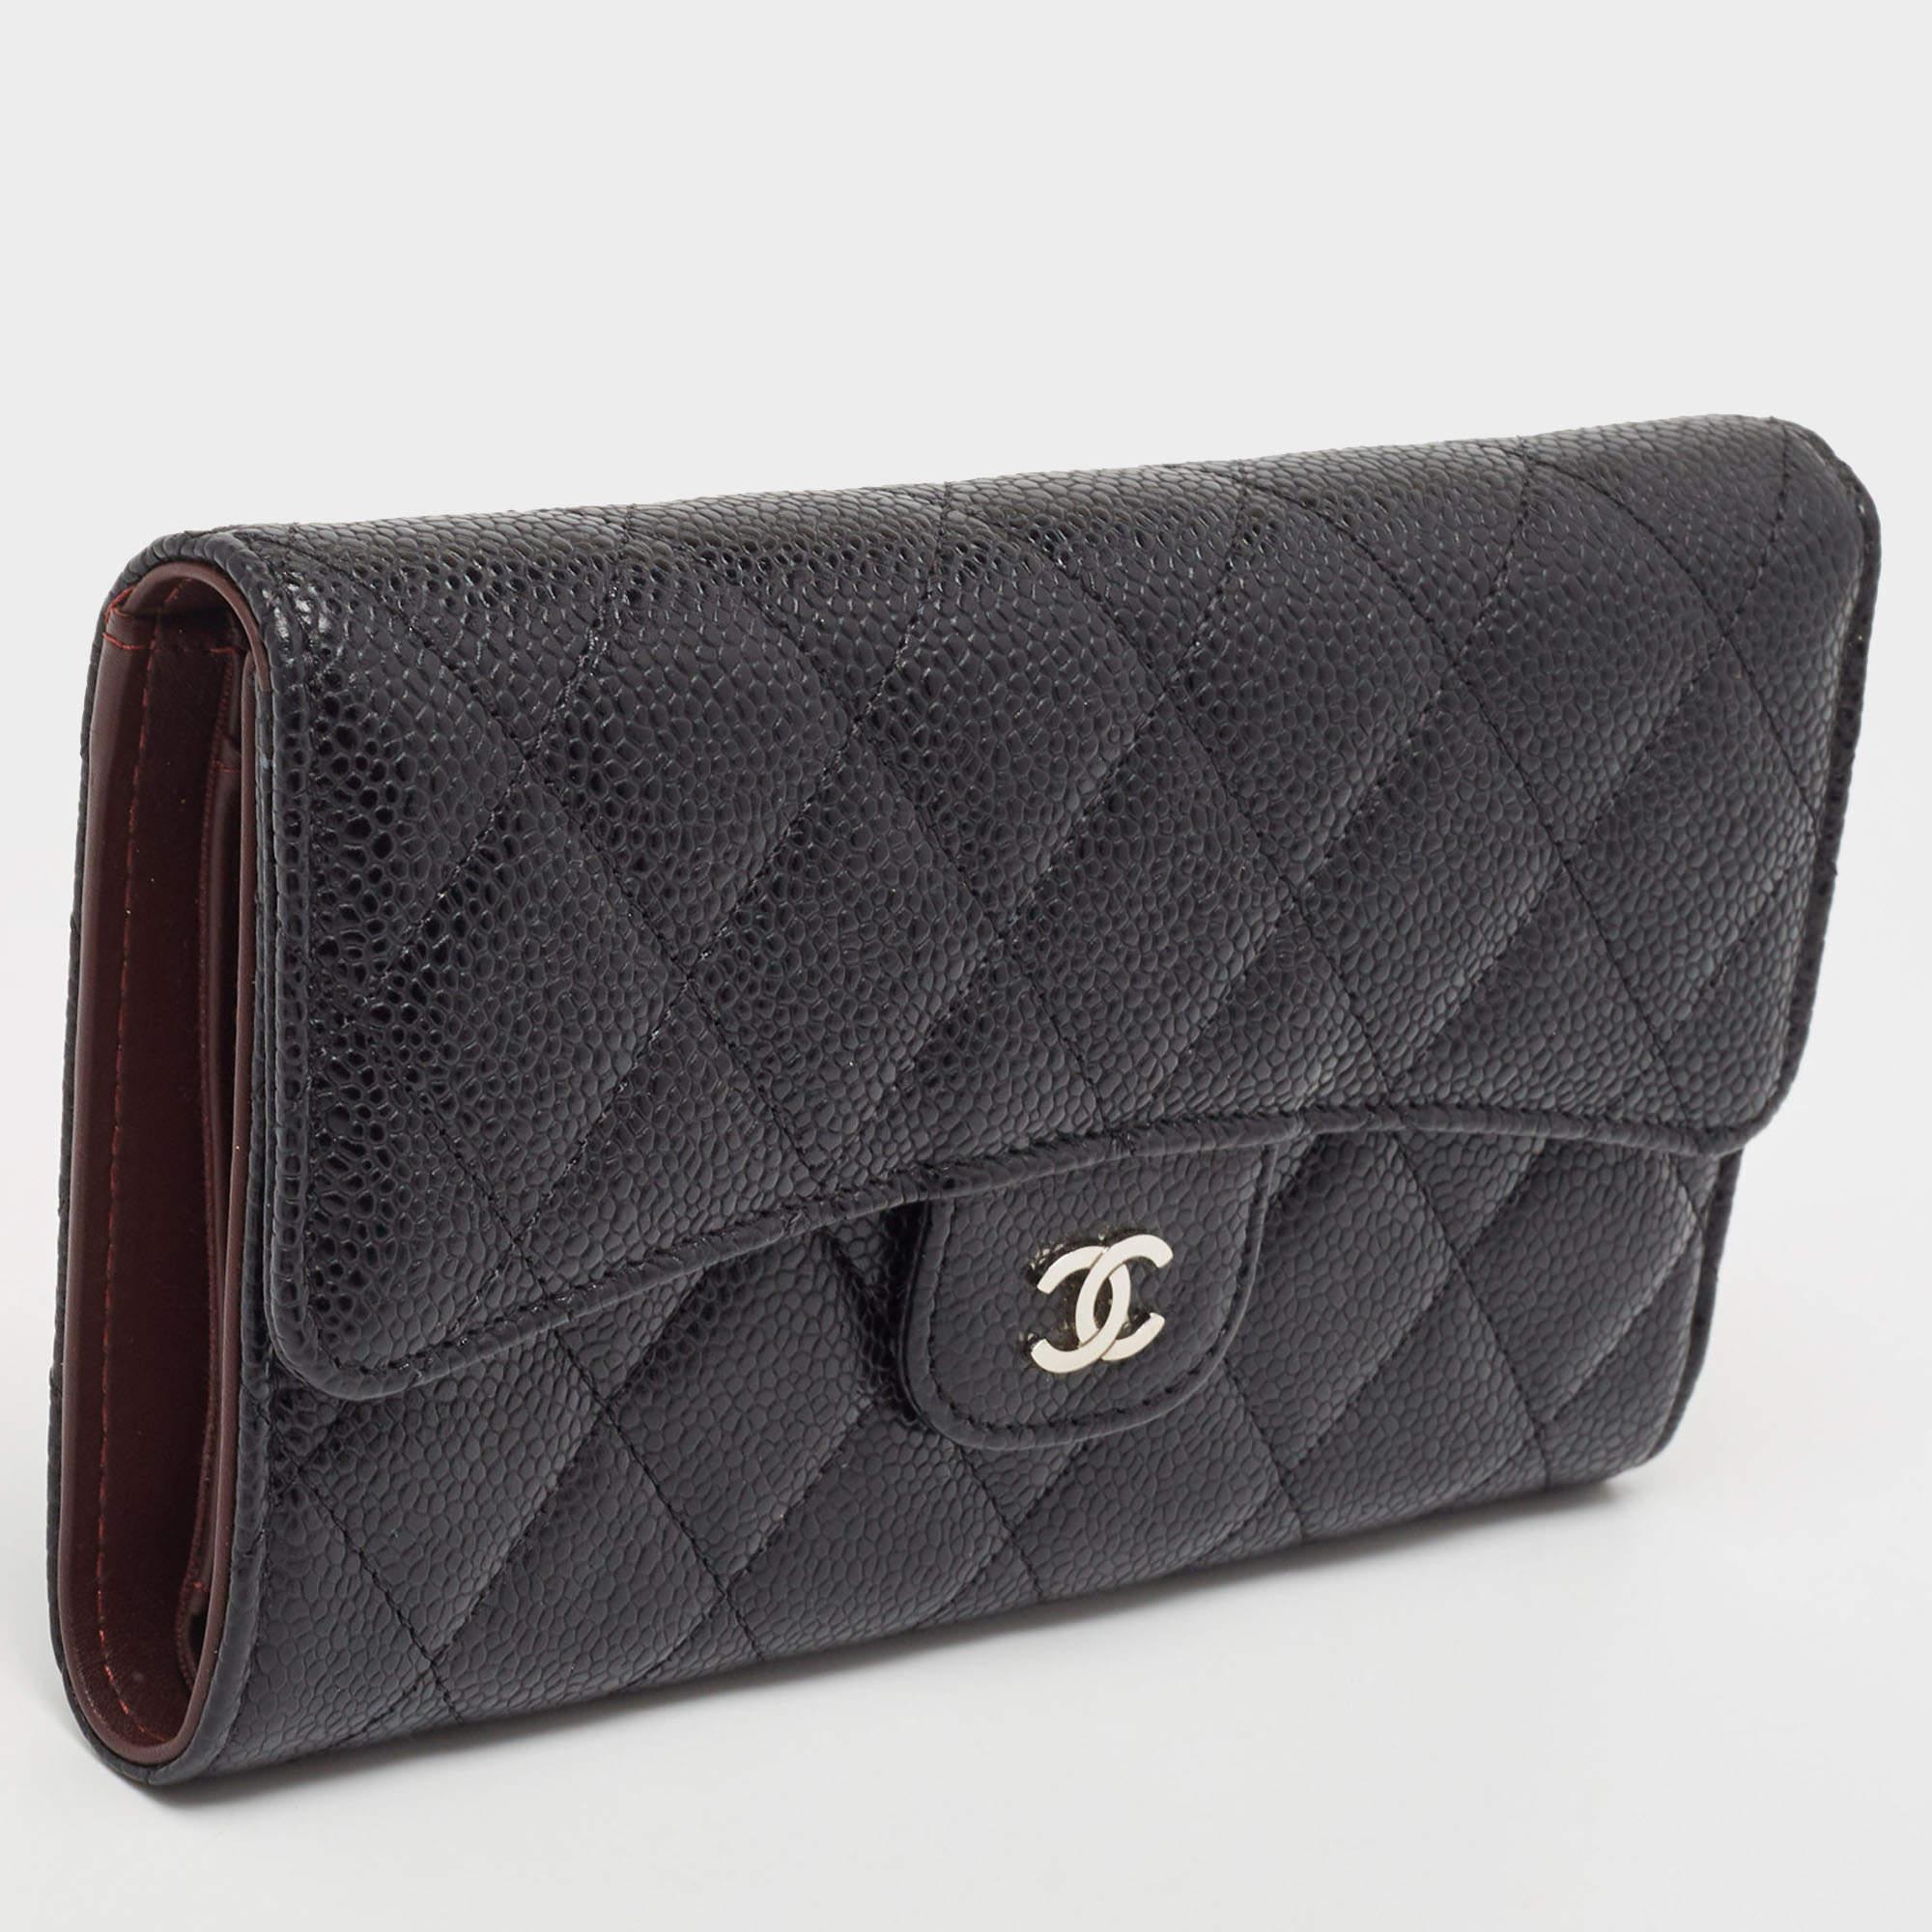 This Chanel Classic Flap wallet is an immaculate balance of sophistication and utility. It has been designed using prime quality materials and elevated by a sleek finish. The creation is equipped with ample space for your monetary essentials.

